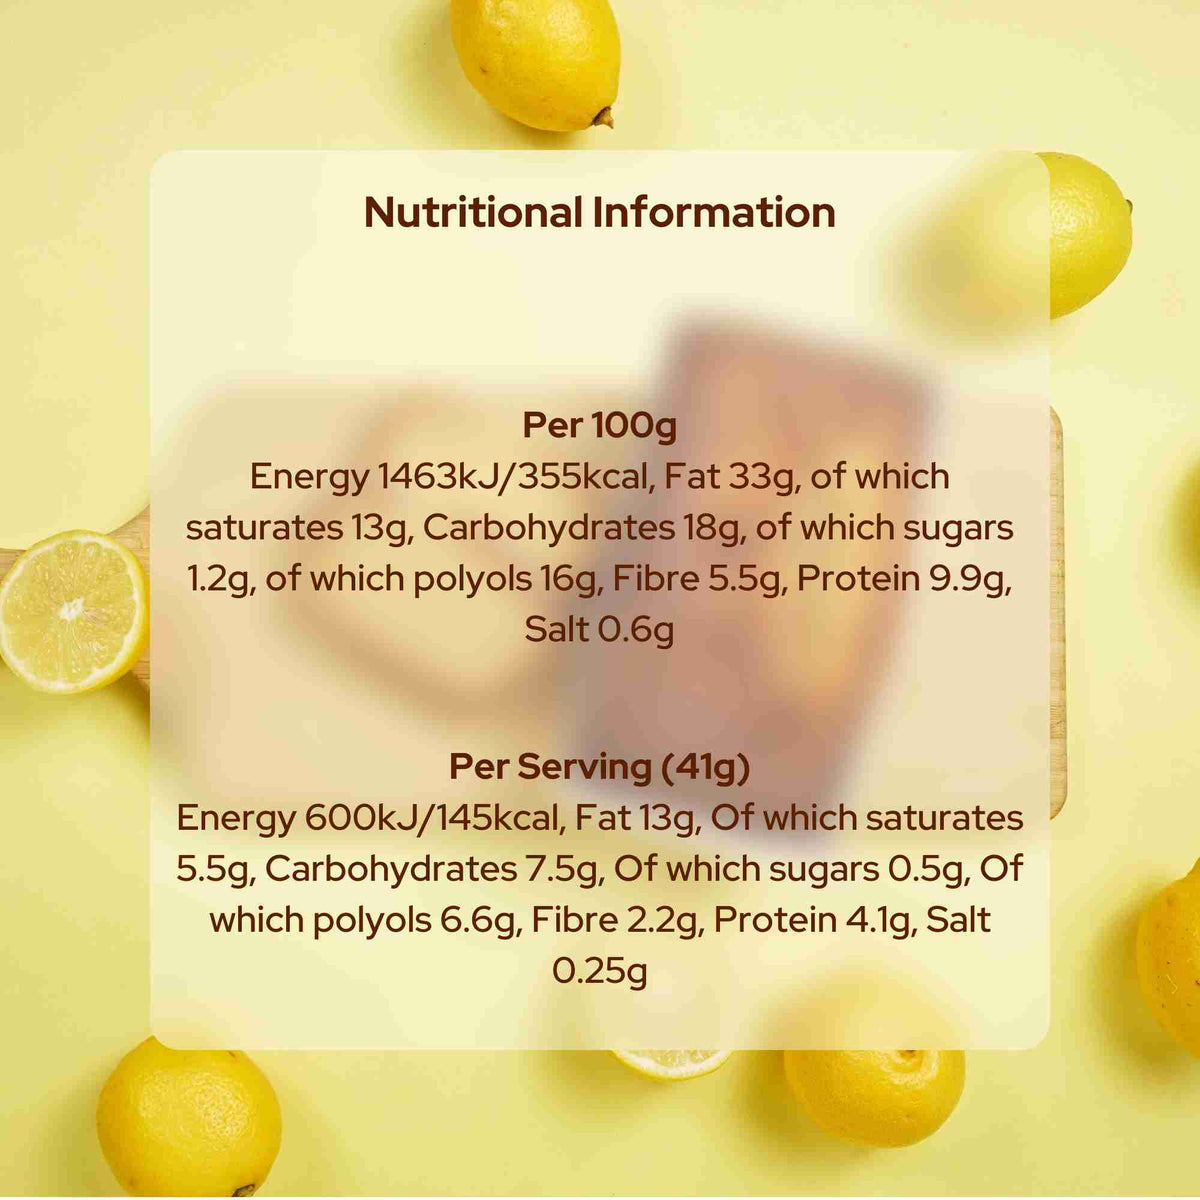 Lemon Drizzle Keto Cakes in the UK - Starbucks. Low Carb and Diabetic Friendly ( also gluten free) Nutritional Information